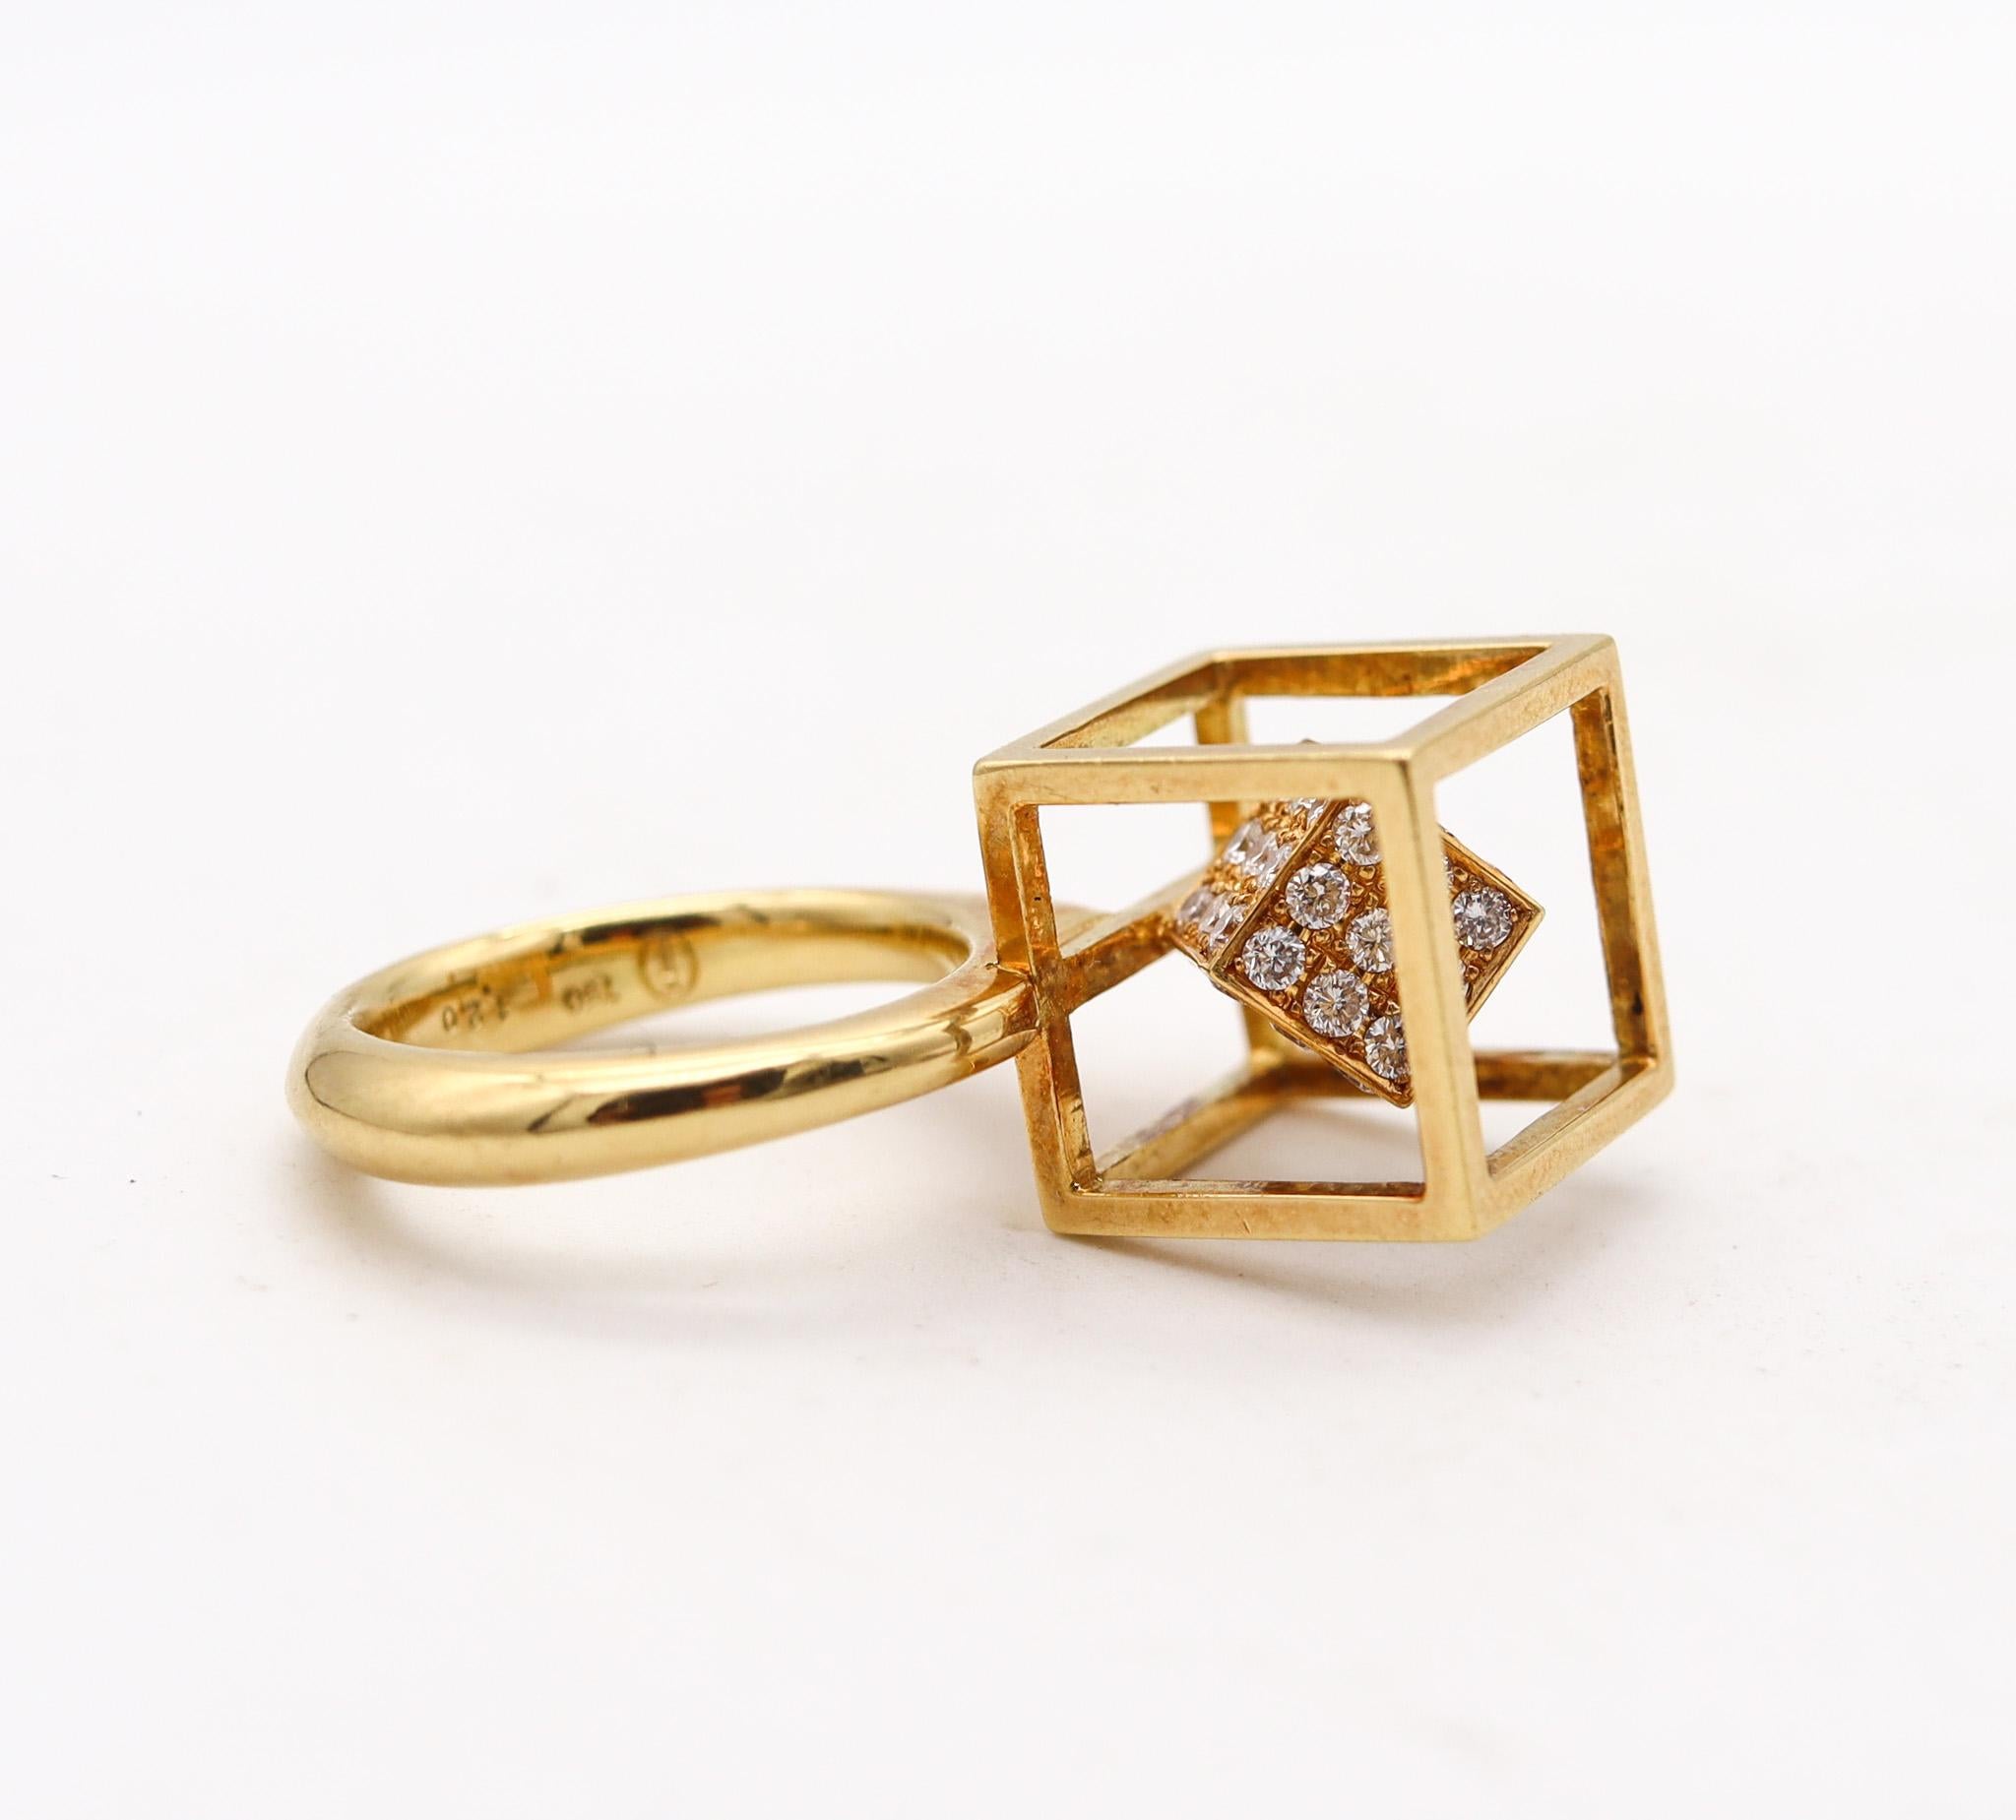 Brilliant Cut Modernist Sculptural Op Art Ring In 18Kt Yellow Gold With 1.20 Ctw In Diamonds For Sale